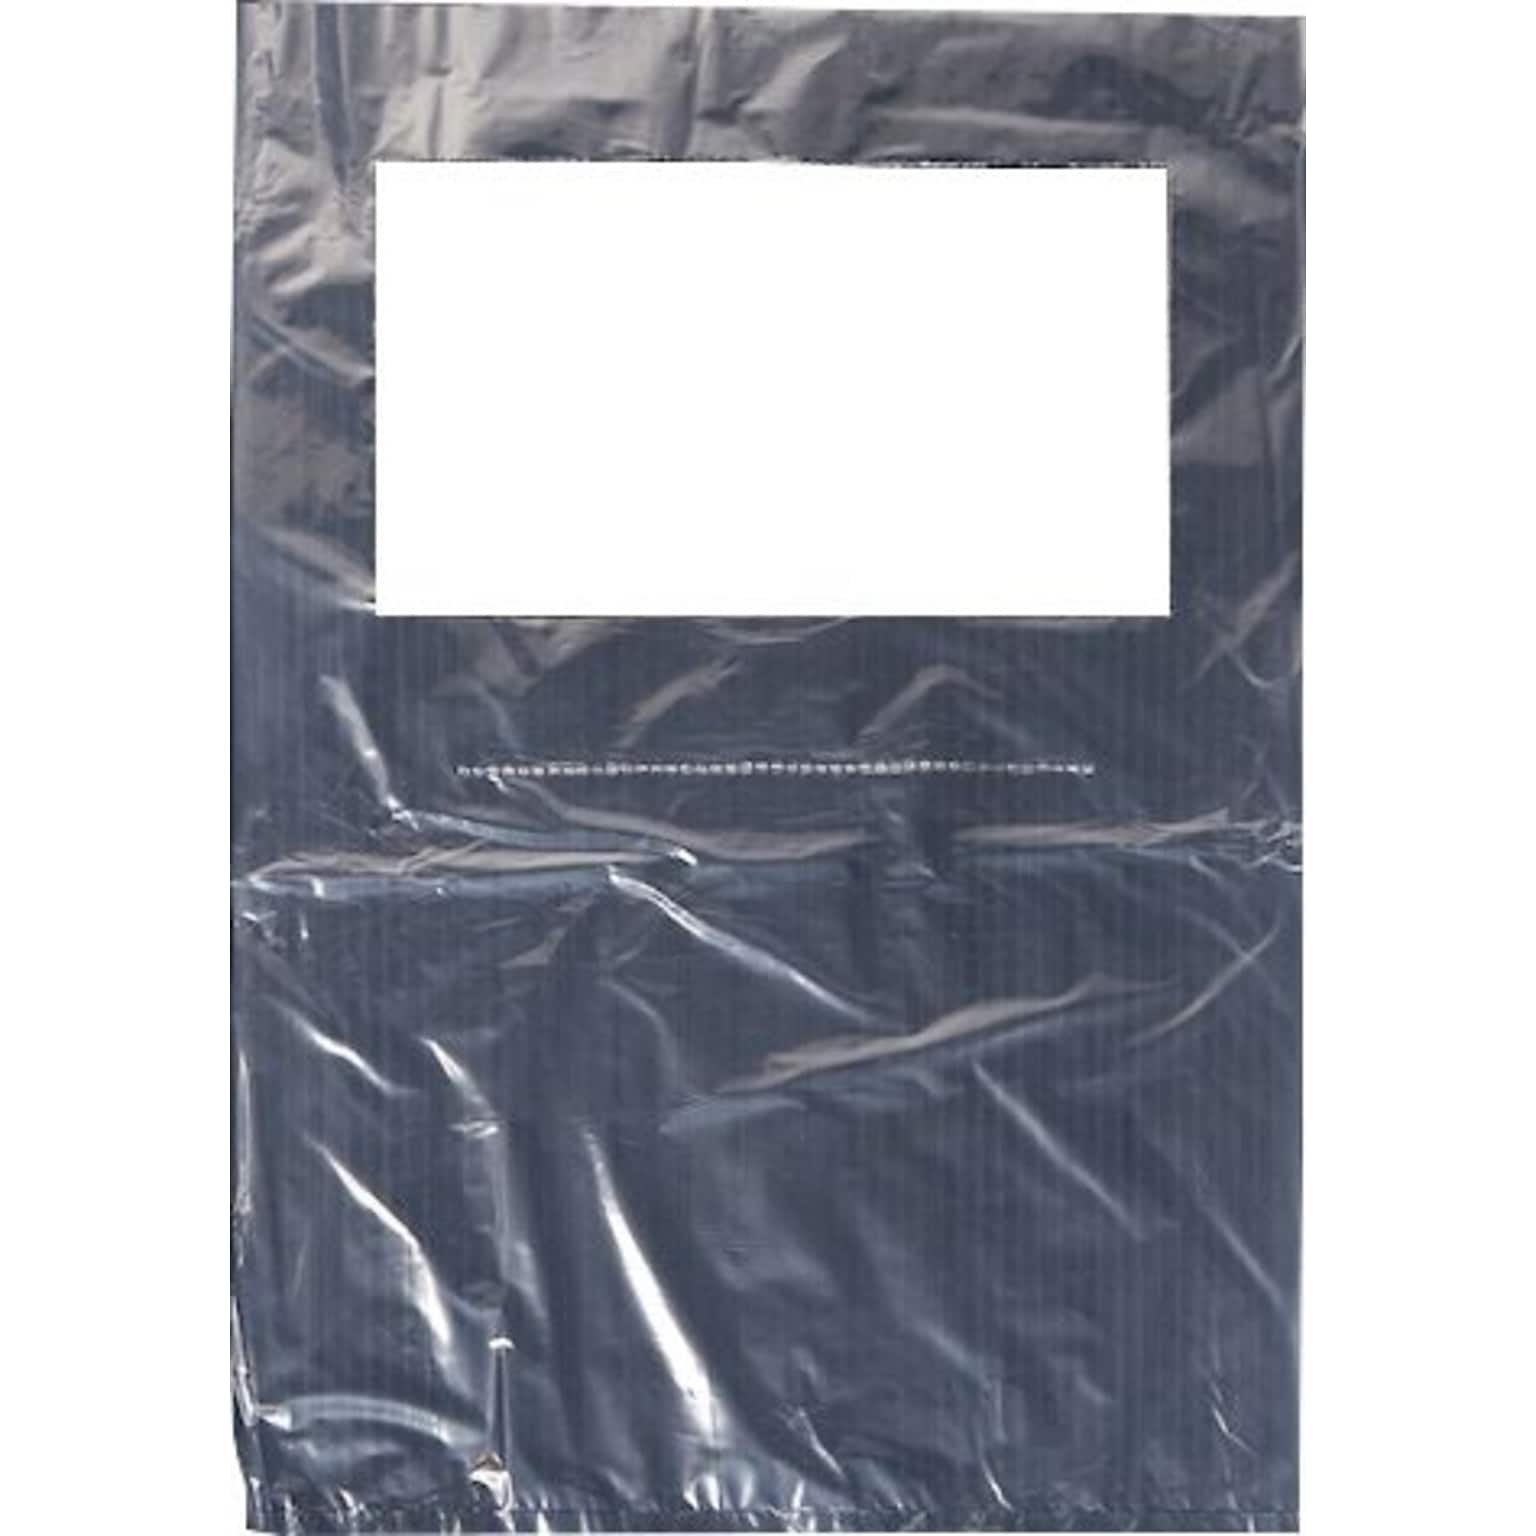 Scensibles 1 Gallon Scented Industrial Trash Bag, 13 x 14, Low Density, 1 mil, White, 500 Bags/Box (LBSF500HD)